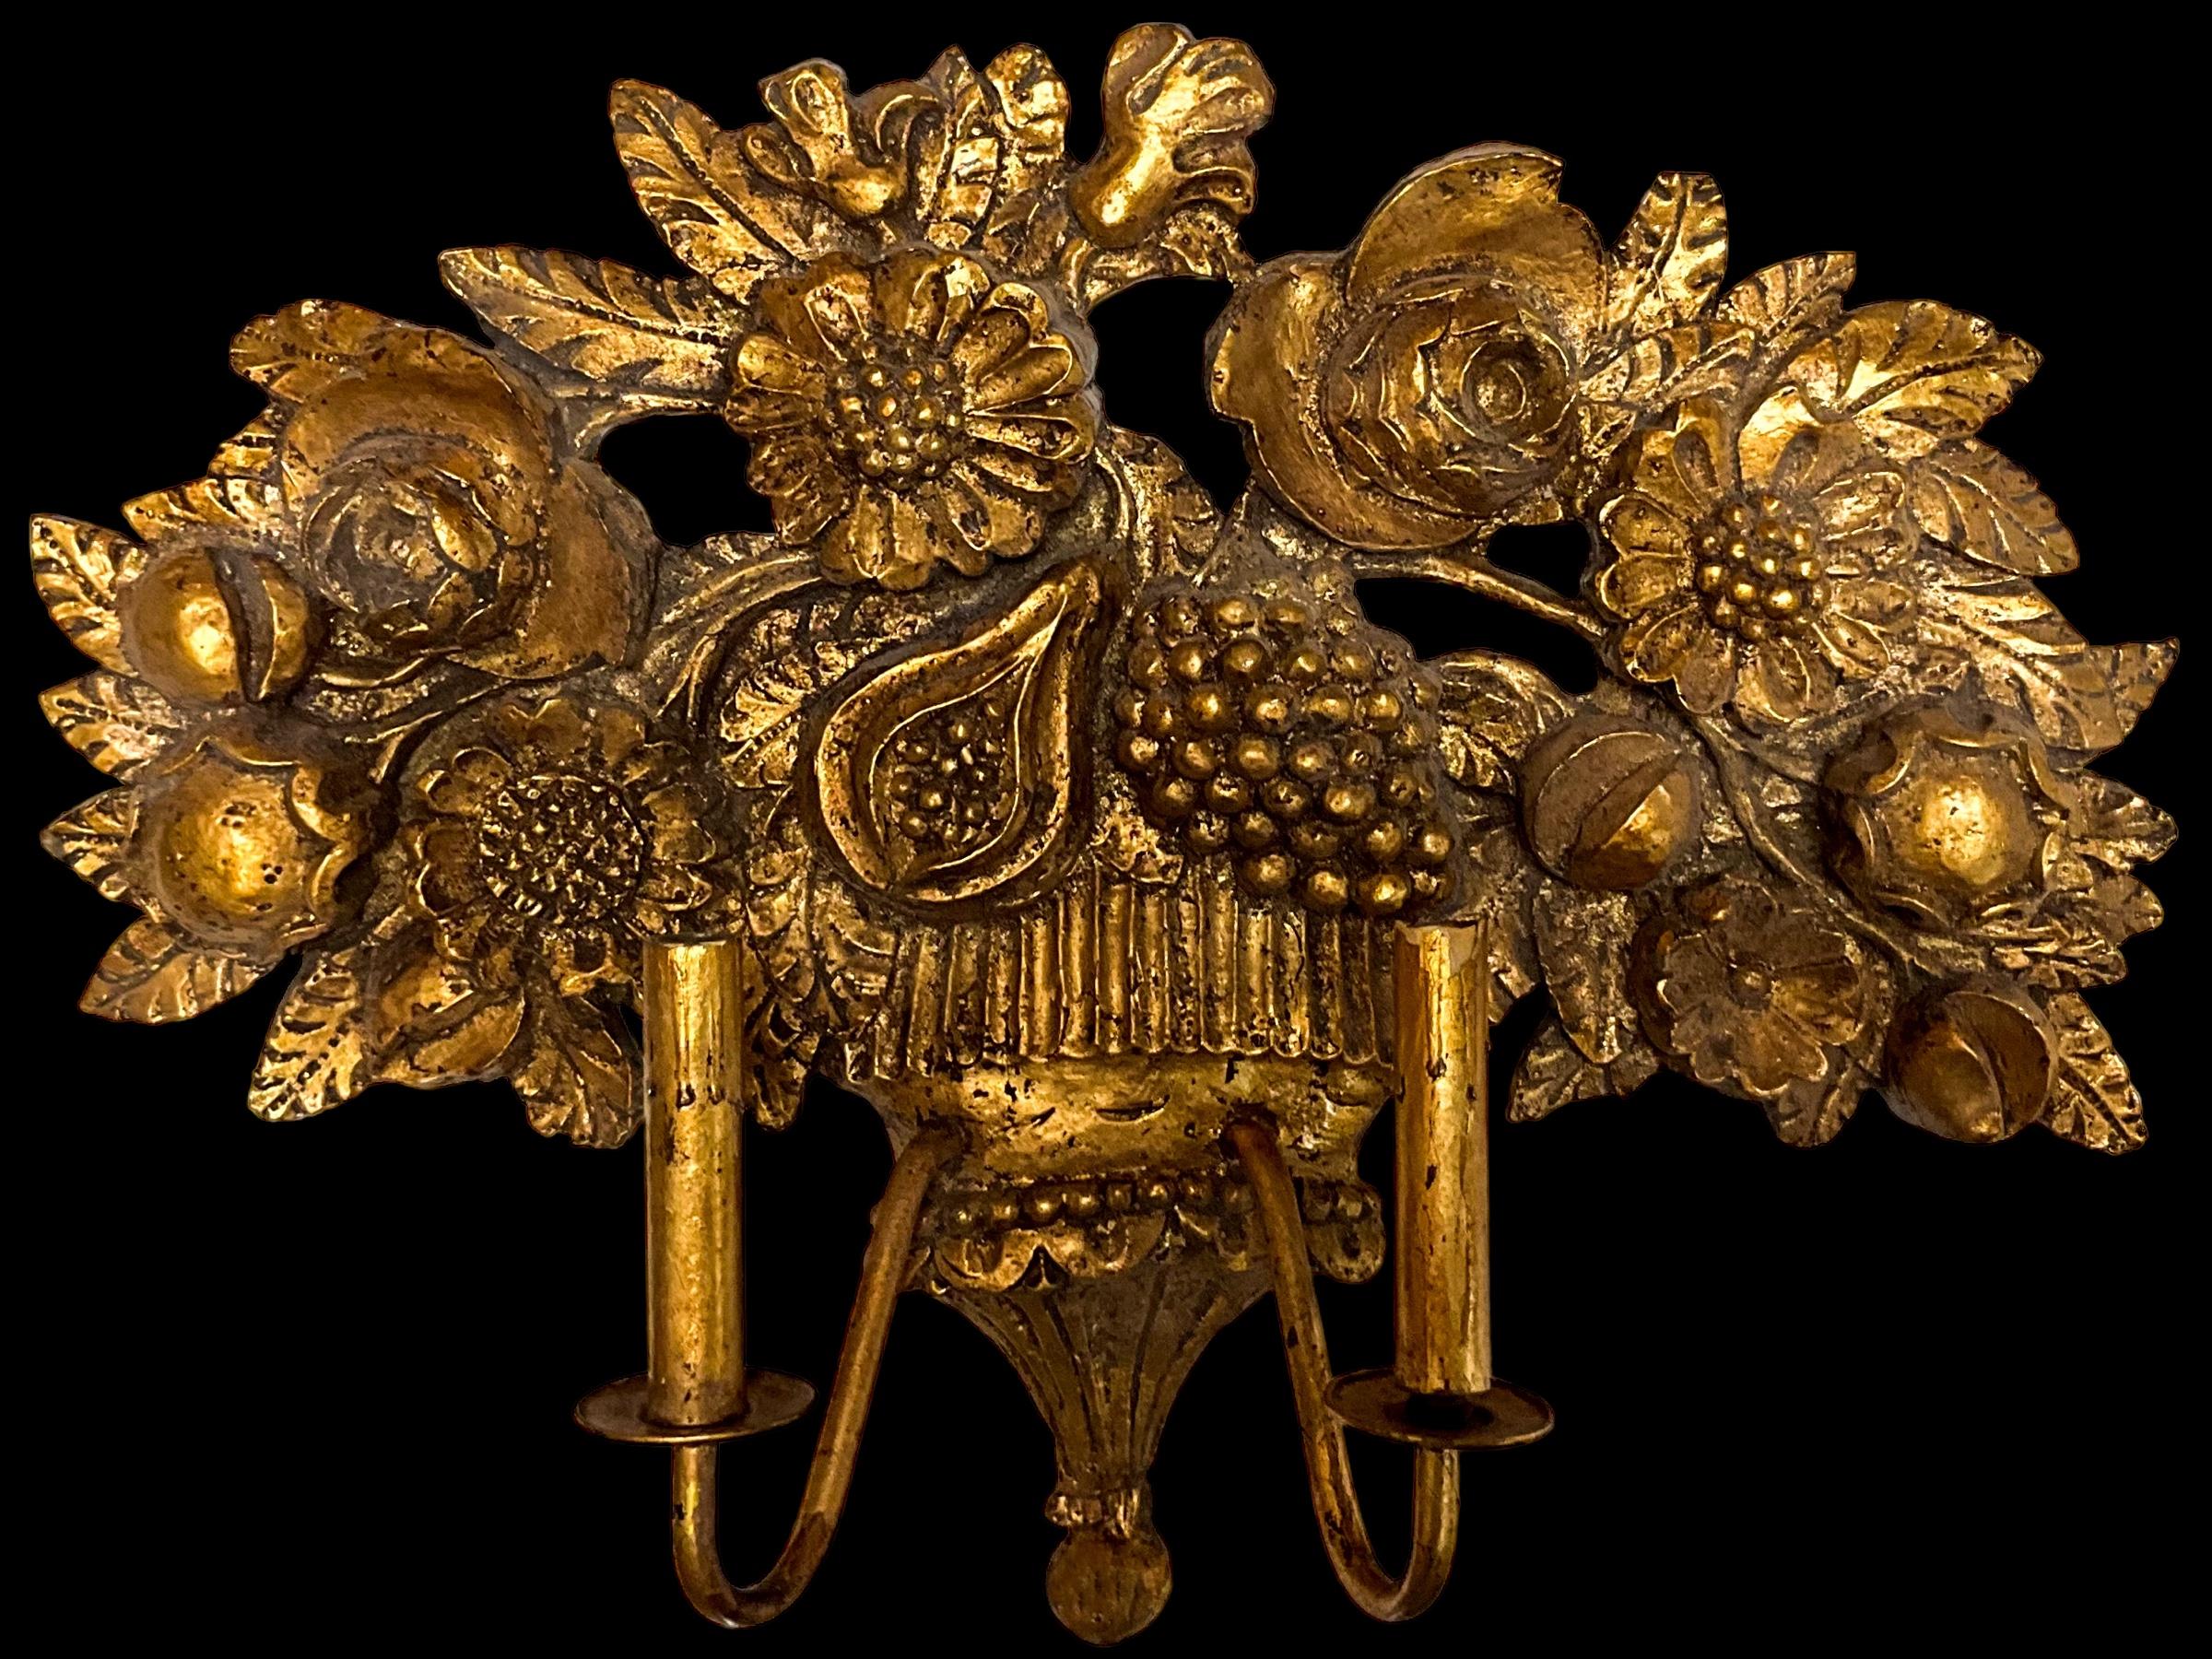 This is a mid-century large scale regency style Italian fruit and floral gold leafed sconce. It is gesso over cast plaster. It is unmarked and in working order.